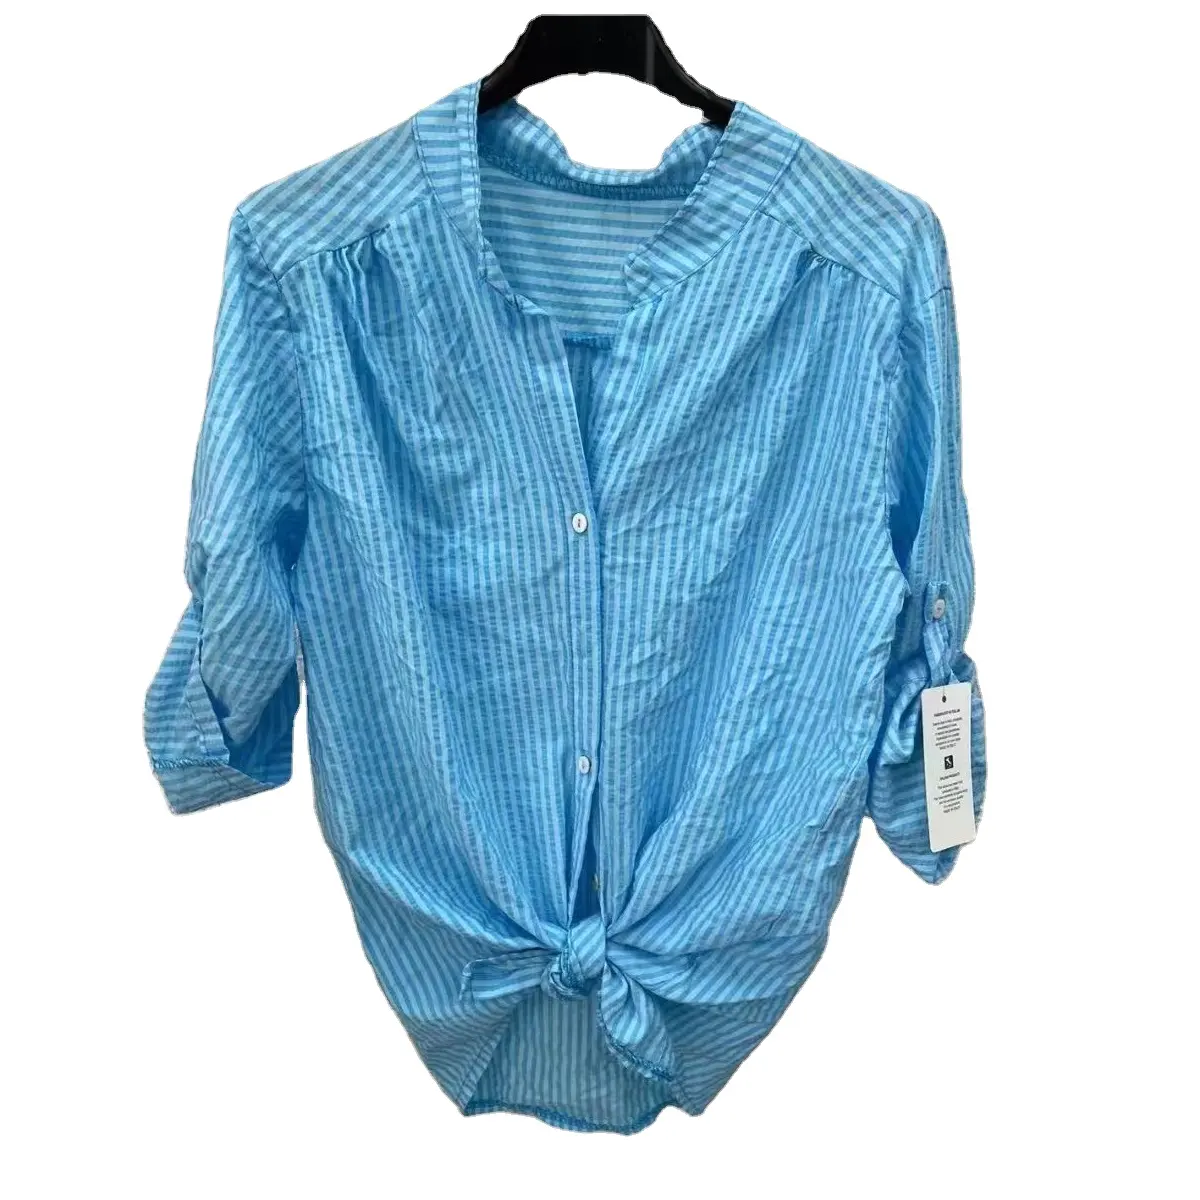 New fashionable beachwear cheap classic solid color casual ladies shirts cotton woven button down top shirts with sewn cuffs